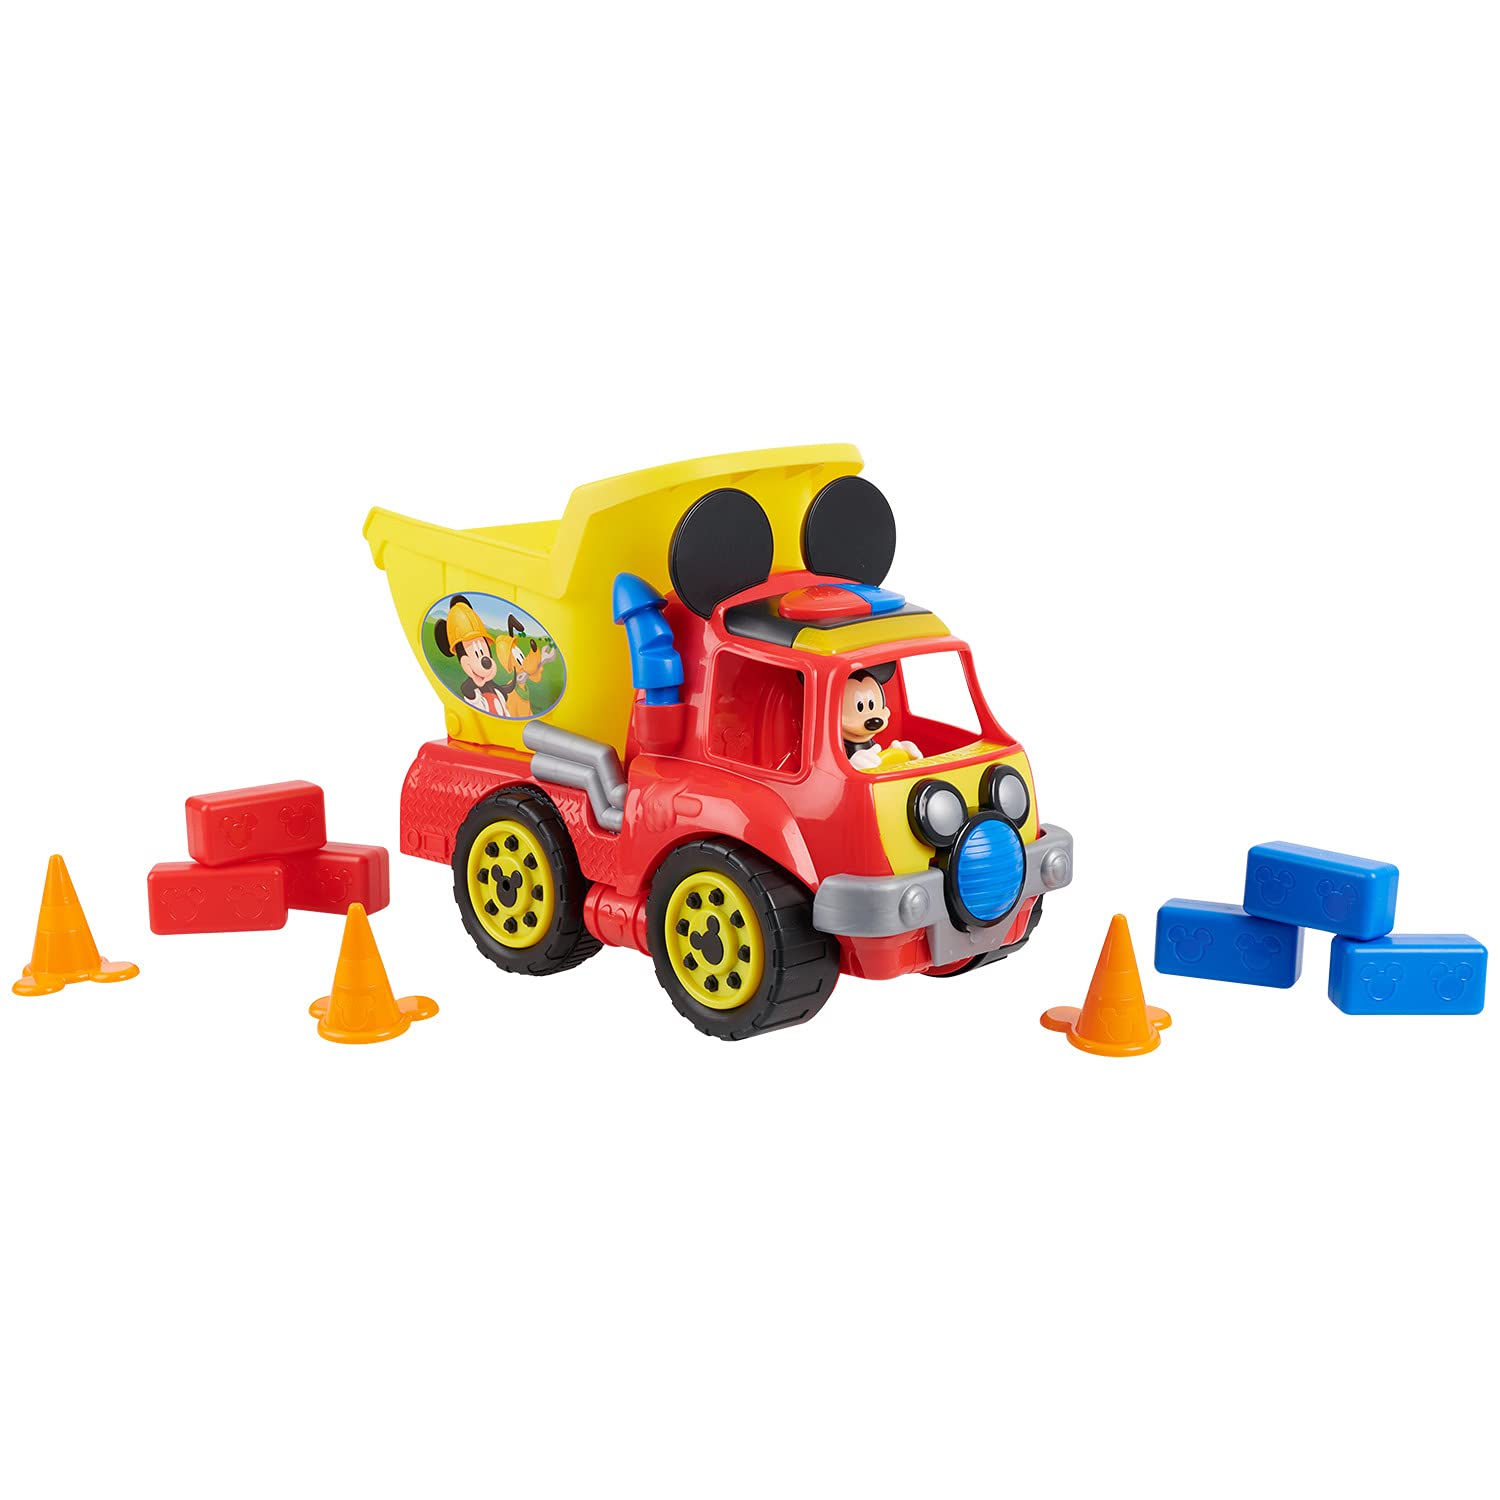 Mickey Mouse Mickey Mouse Dump Truck Vehicles, Ages 3 Up, by Just Play